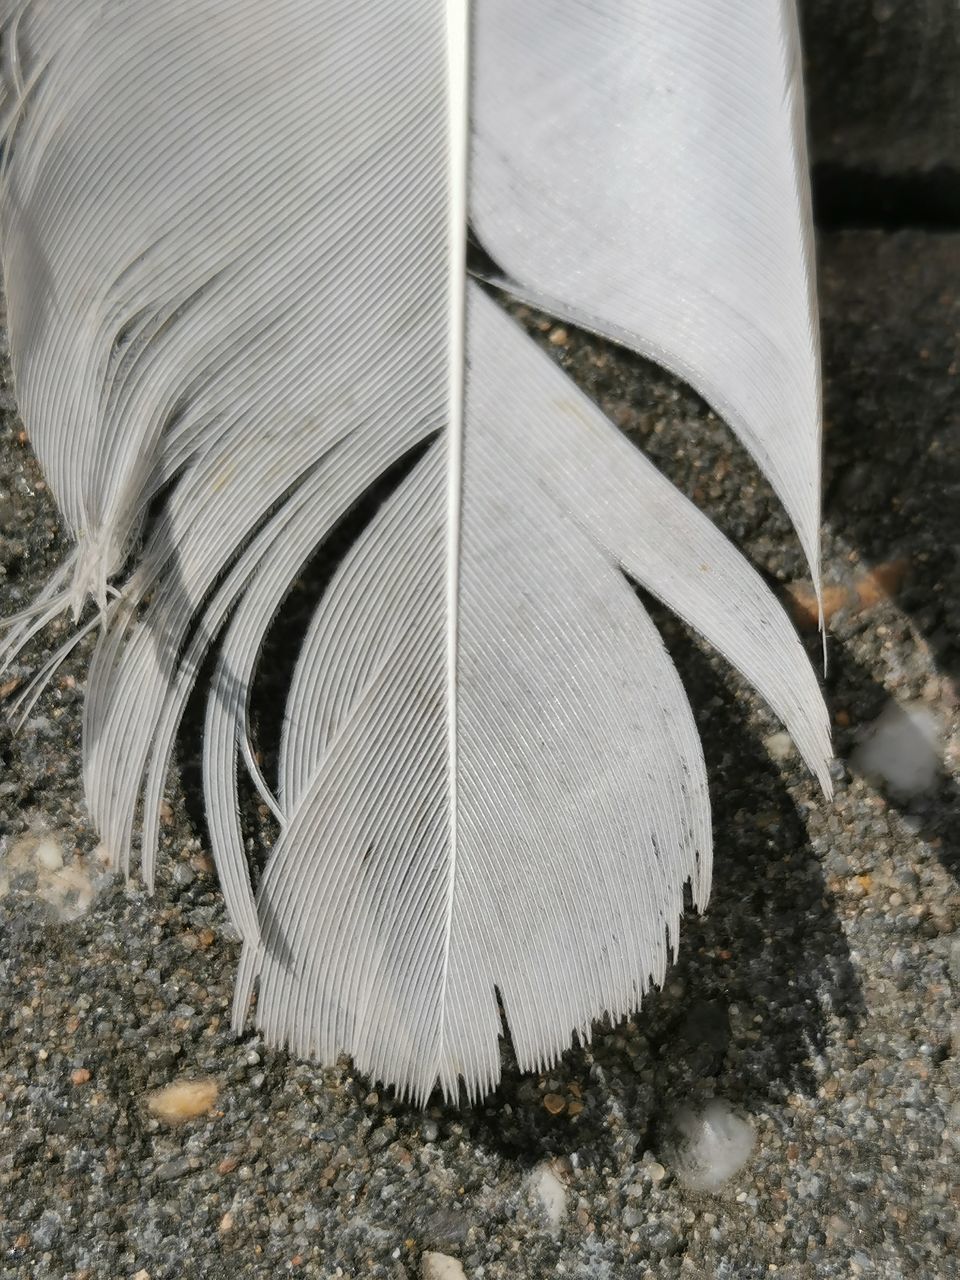 CLOSE-UP OF WHITE FEATHER ON THE LAND